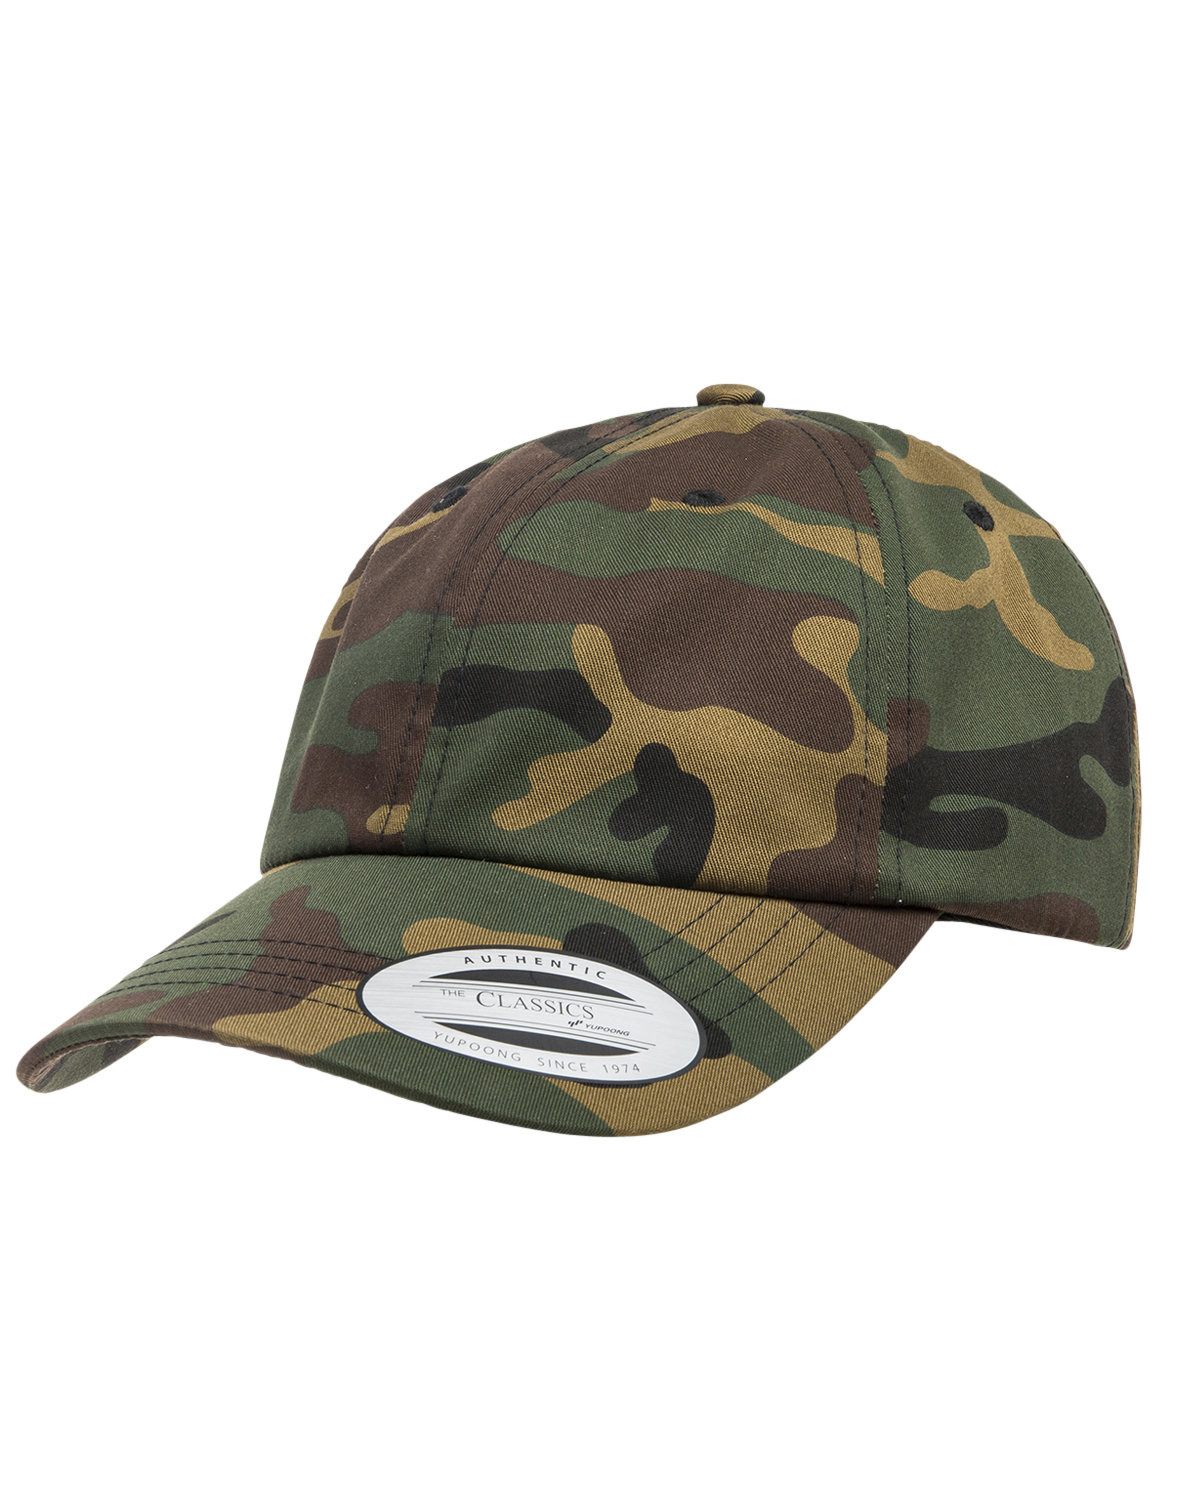 Yupoong Adult Low-Profile Cotton Twill Dad Cap GREEN CAMO 